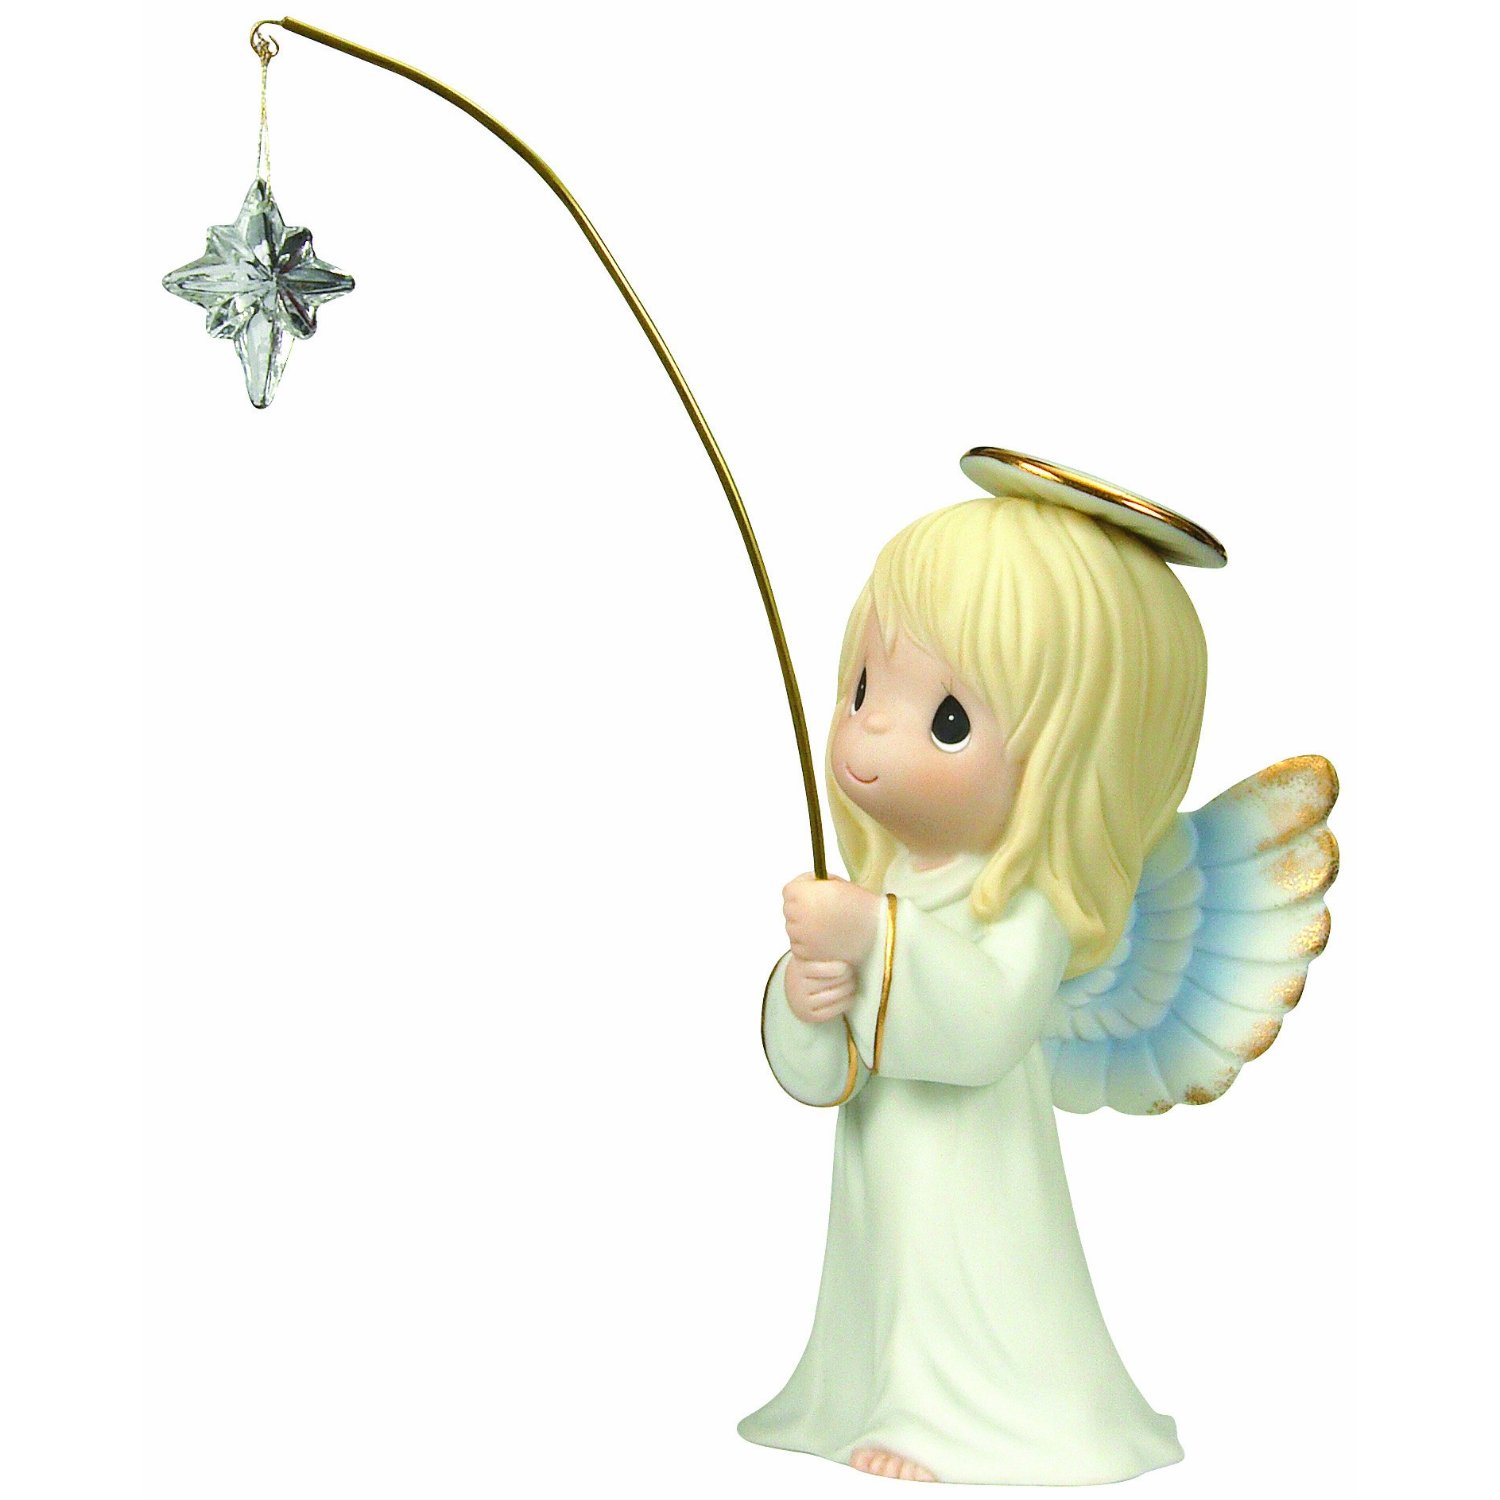 Precious Moments "And They Followed The Star" Figurine